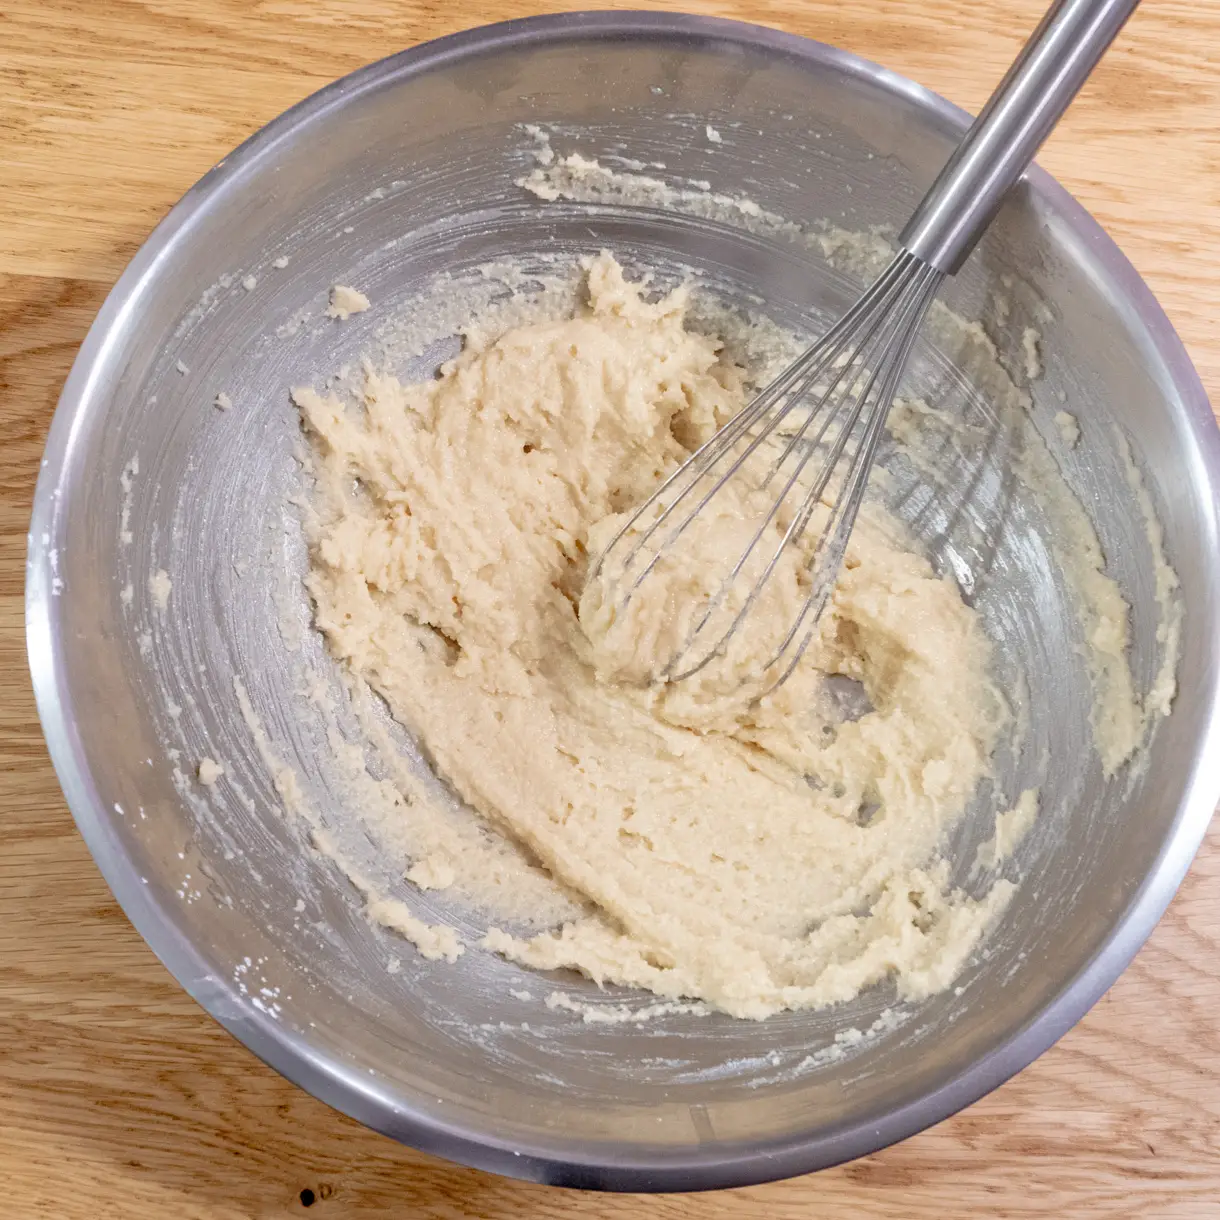 The stiff financier batter in a mixing bowl before adding the melted butter.